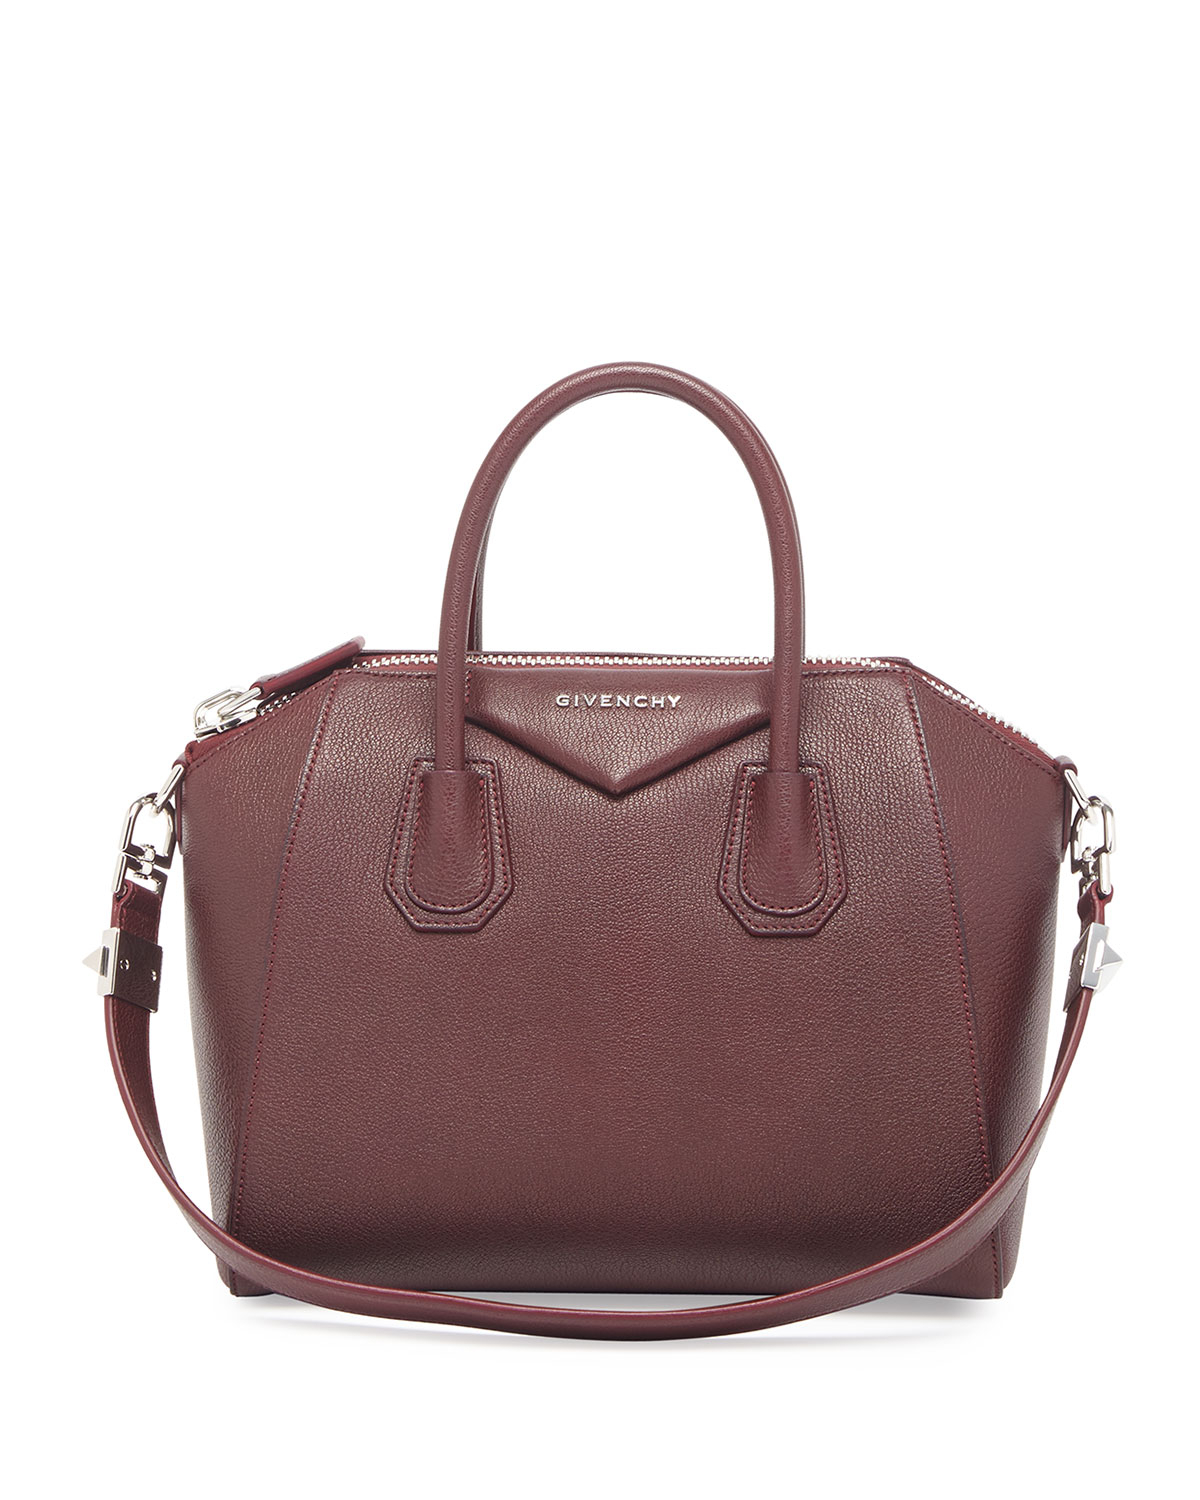 Givenchy Antigona Small Leather Satchel Bag in Red (BORDEAUX) | Lyst